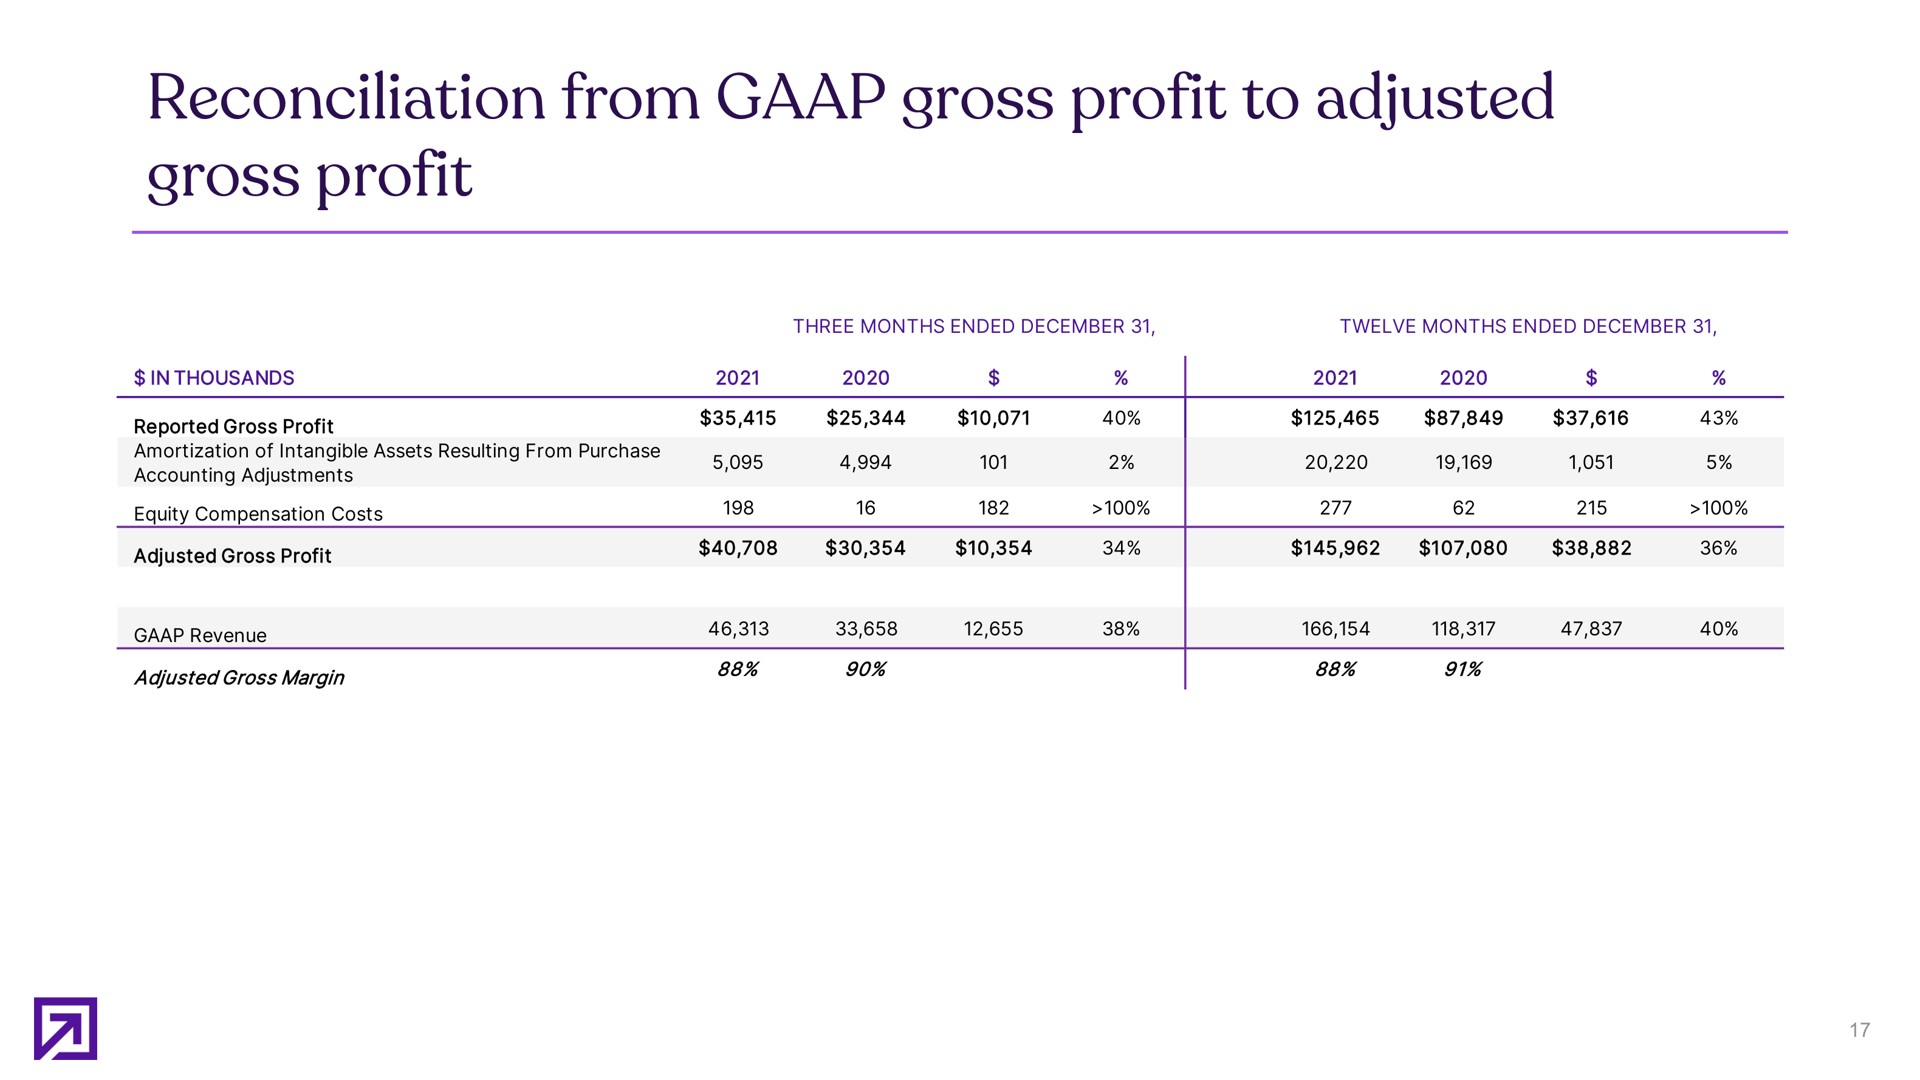 reconciliation from gross profit to adjusted gross profit | Definitive Healthcare